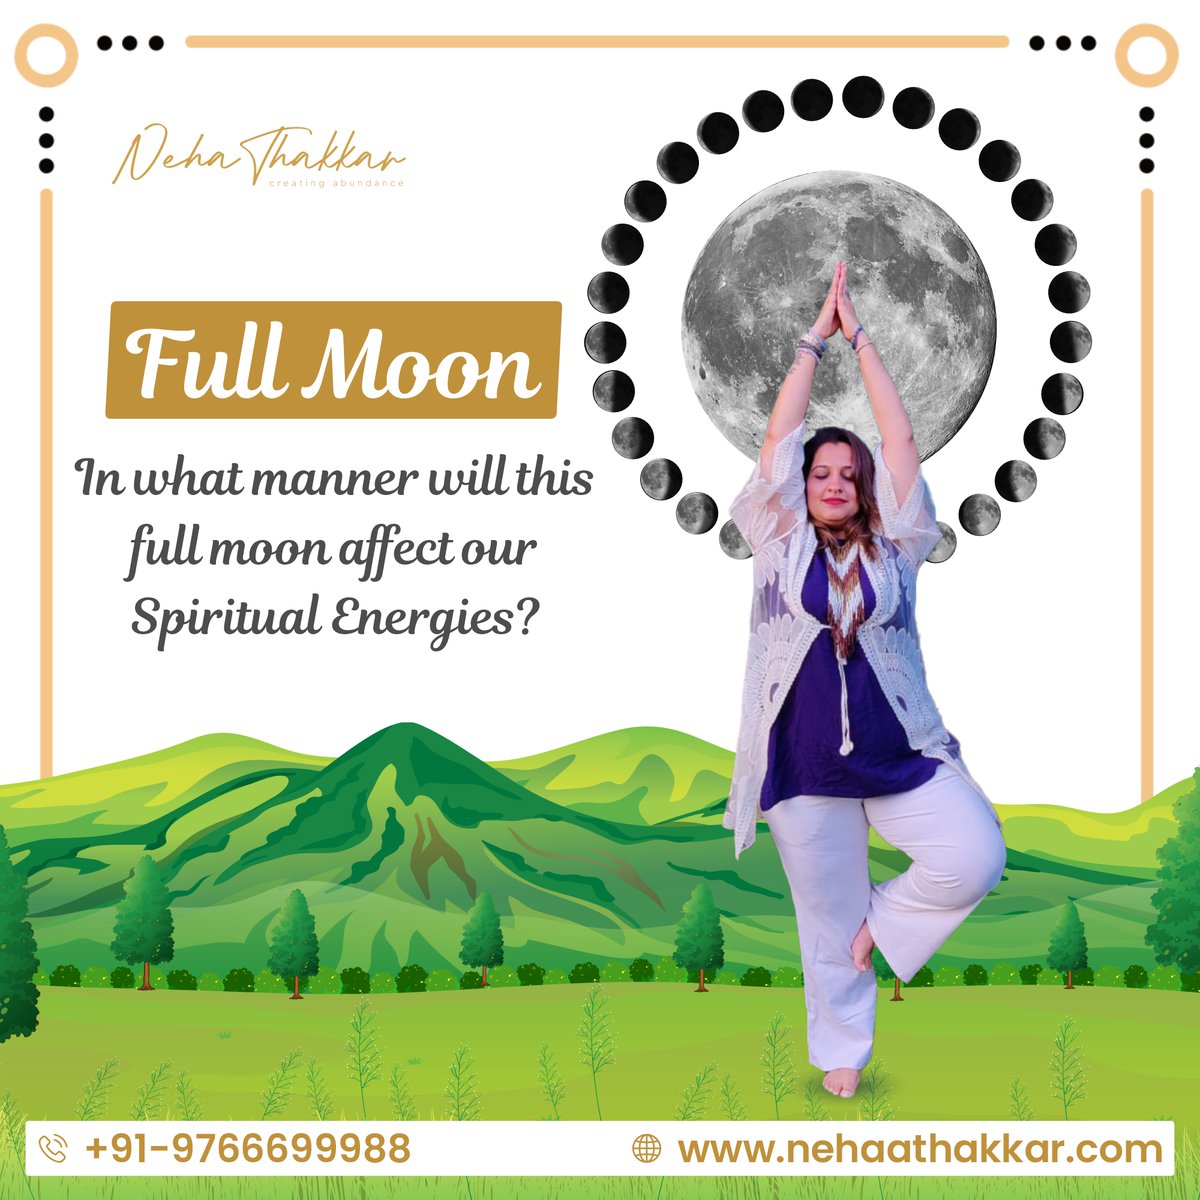 Embracing the cosmic vibes of the full moon Exploring the mystical impact on our spiritual energies - let the lunar magic guide us through introspection and transformation. Instagram instagram.com/nehathakkar_cr… Facebook facebook.com/nehathakkarcre… #FullMoonEnergies #CosmicConnection